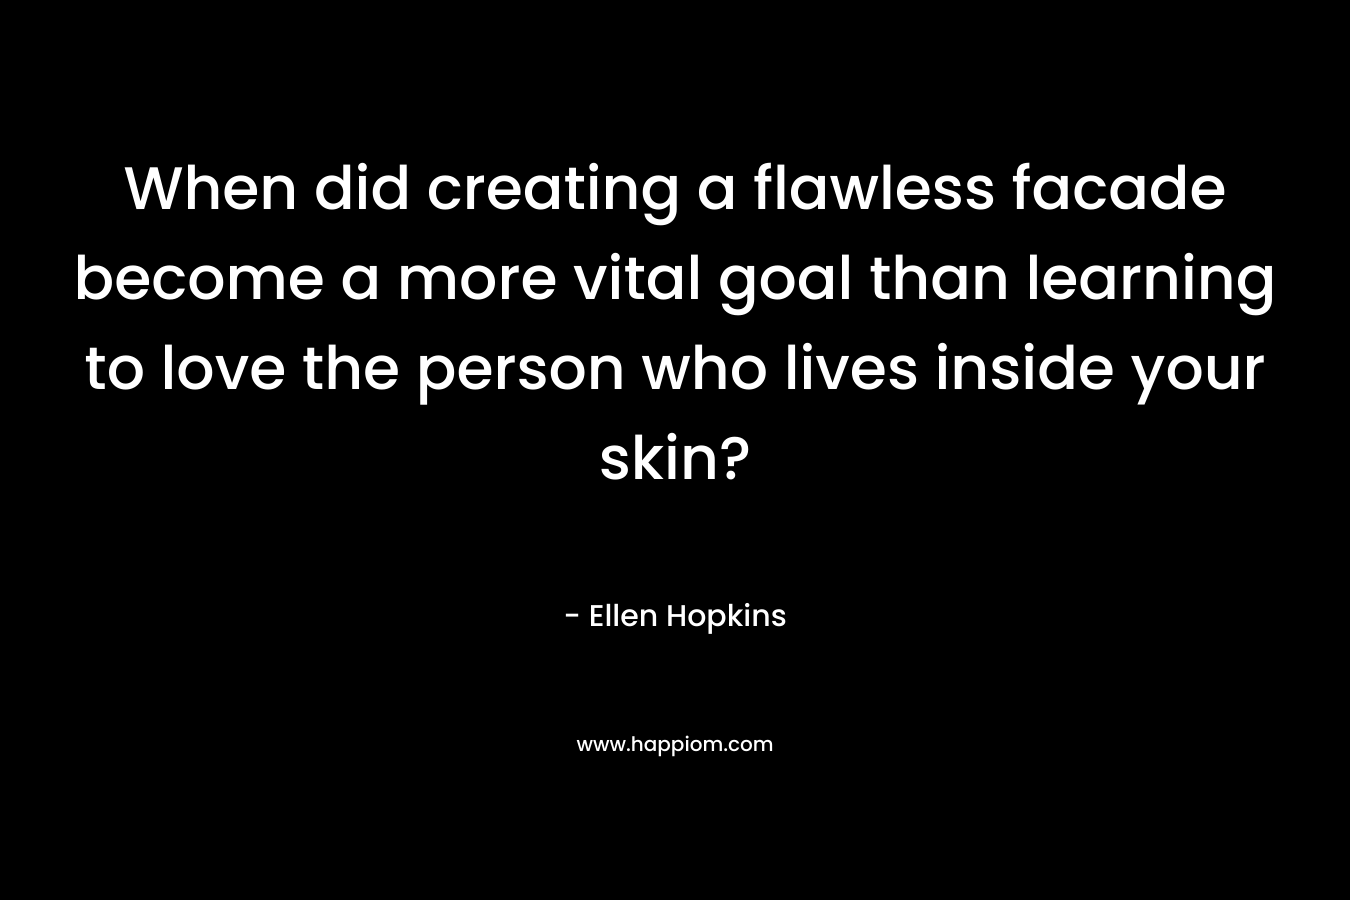 When did creating a flawless facade become a more vital goal than learning to love the person who lives inside your skin? – Ellen Hopkins